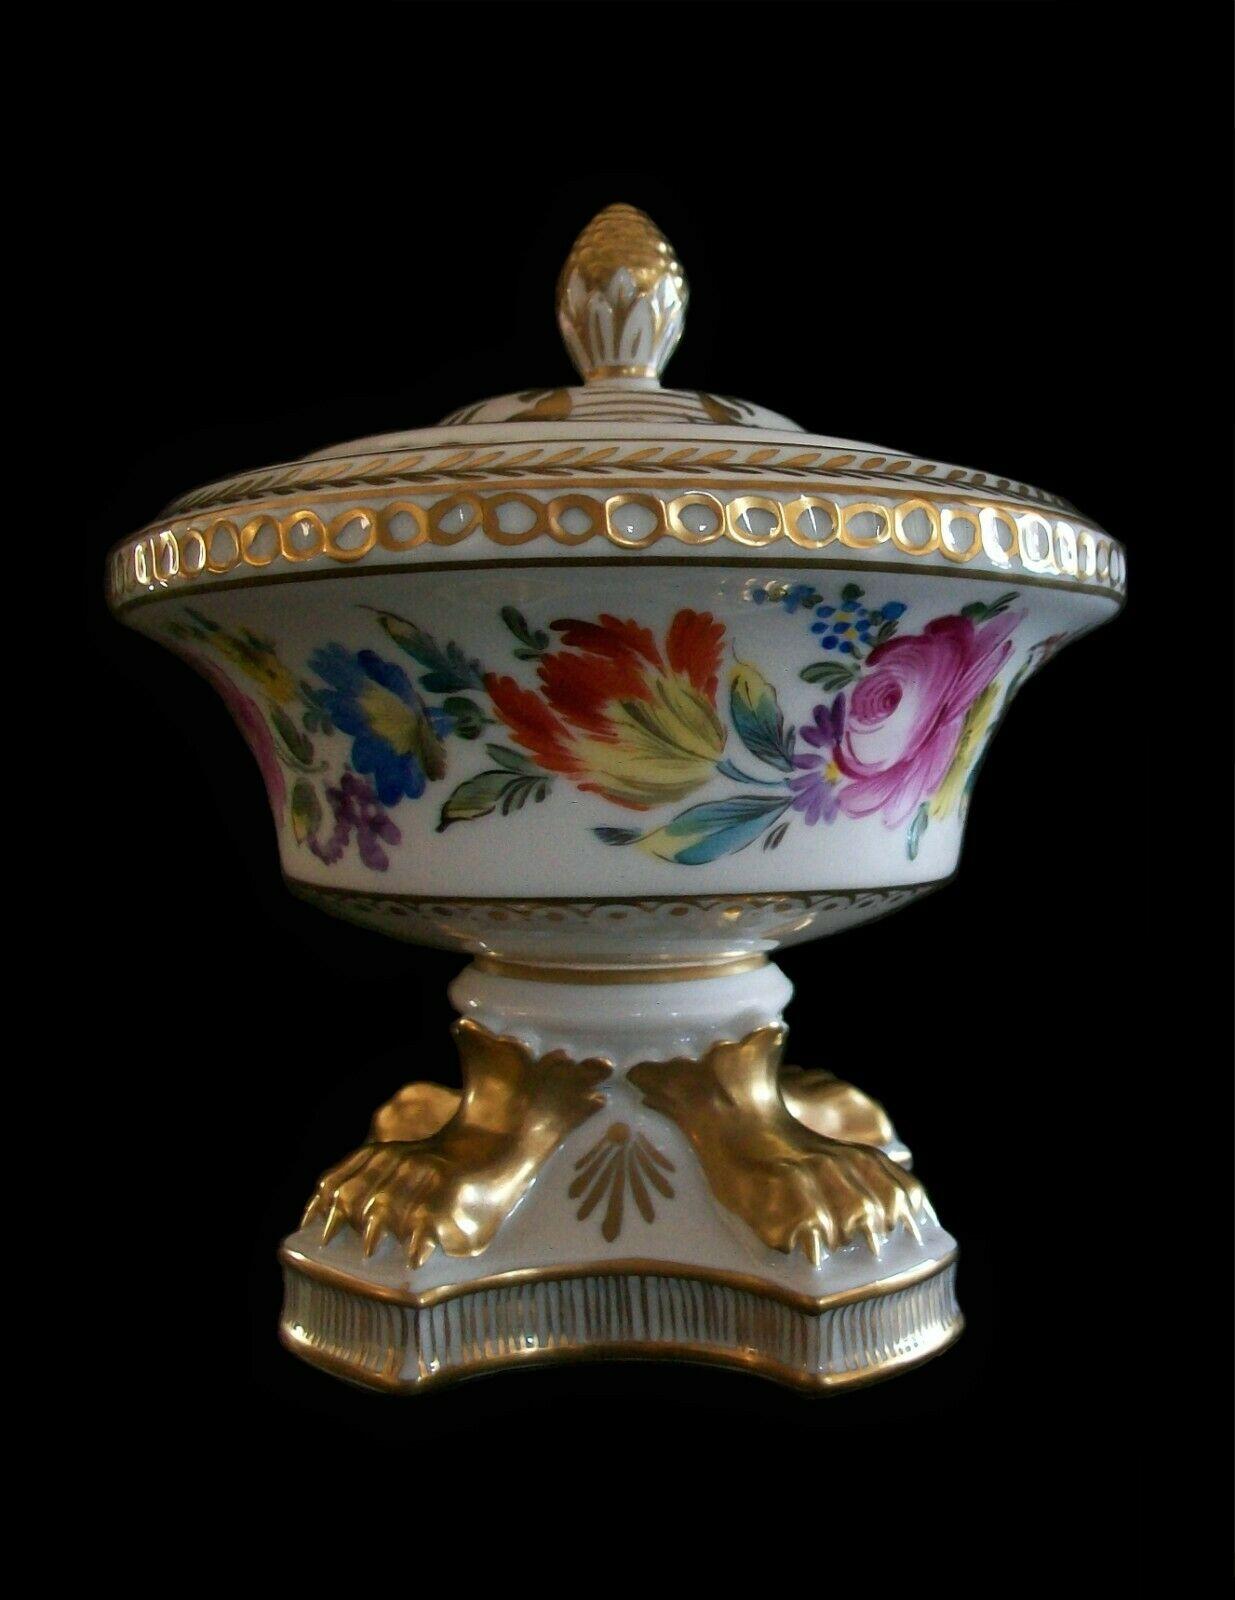 CARL THIEME (Factory / Manufacturer) - Potschappel (Village / Location) - Empire style Dresden floral decorated and gilded porcelain urn with cover - featuring a band of hand painted flowers (Deutsche Blumen) - extravagantly gilded lid, finial and